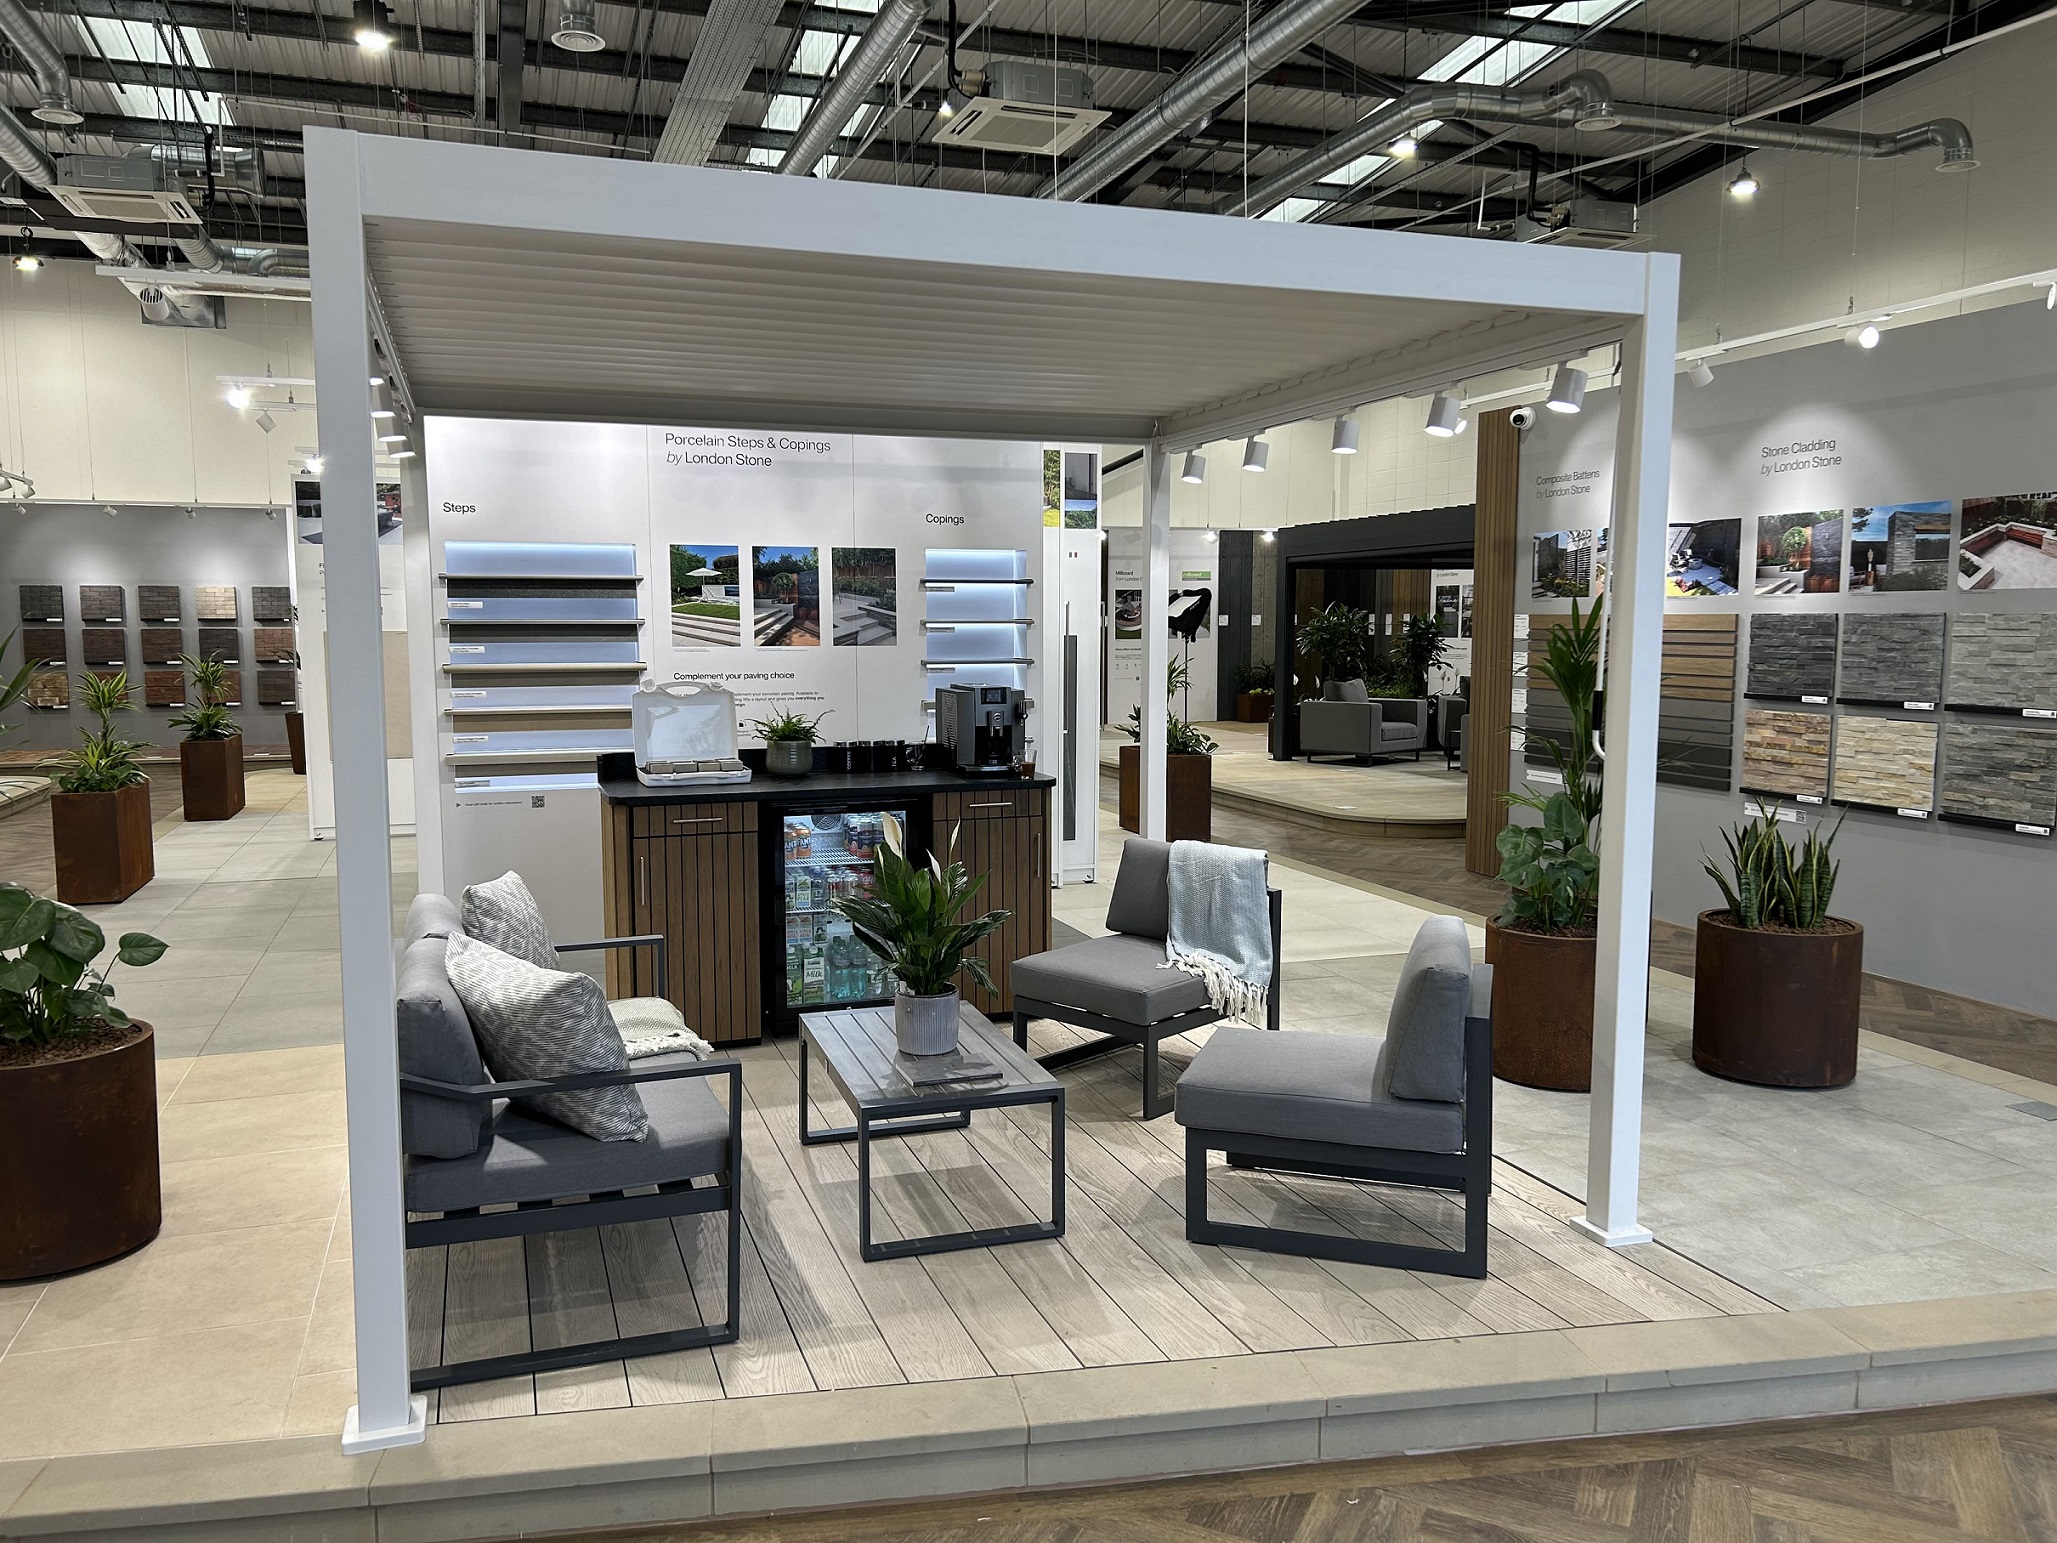 Indoor display with white pergola, furniture, coffee machine and wall displays of hard landscaping materials.